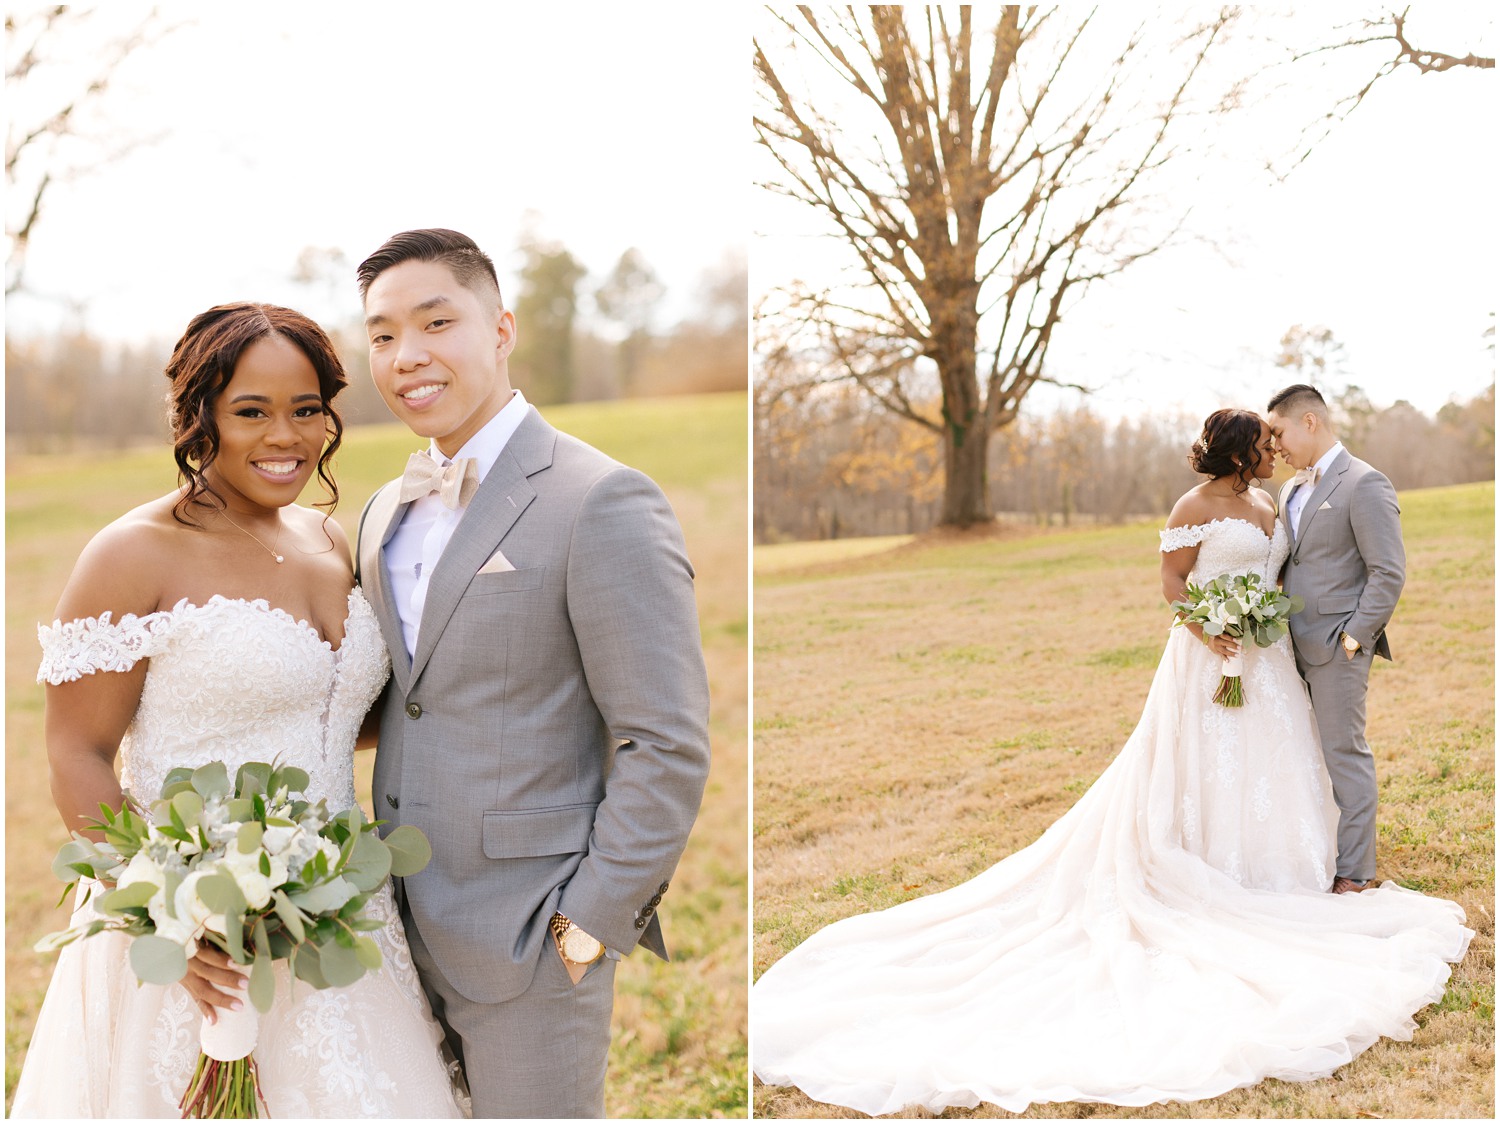 Romantic Moment for a couple on their wedding day by NC Wedding Photographer Chelsea Renay